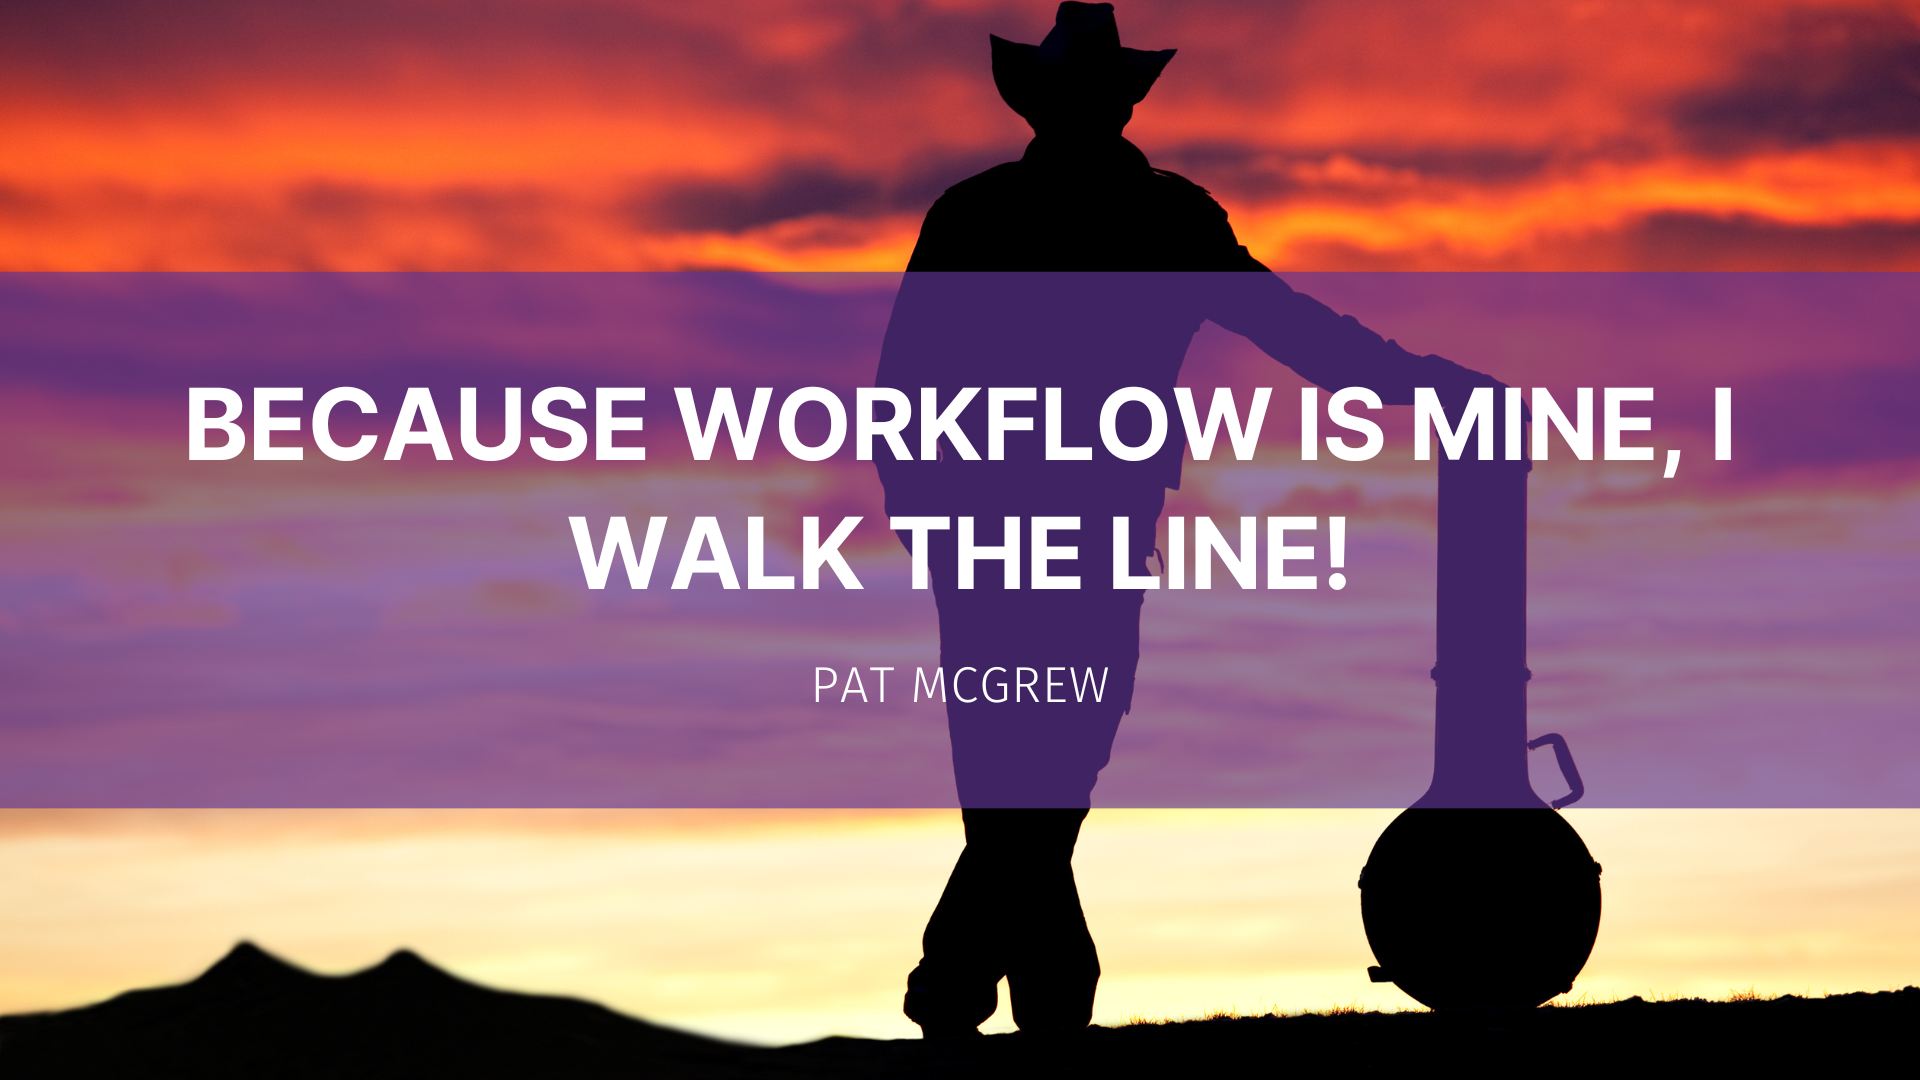 Featured image for “Because Workflow is Mine, I Walk the Line!”